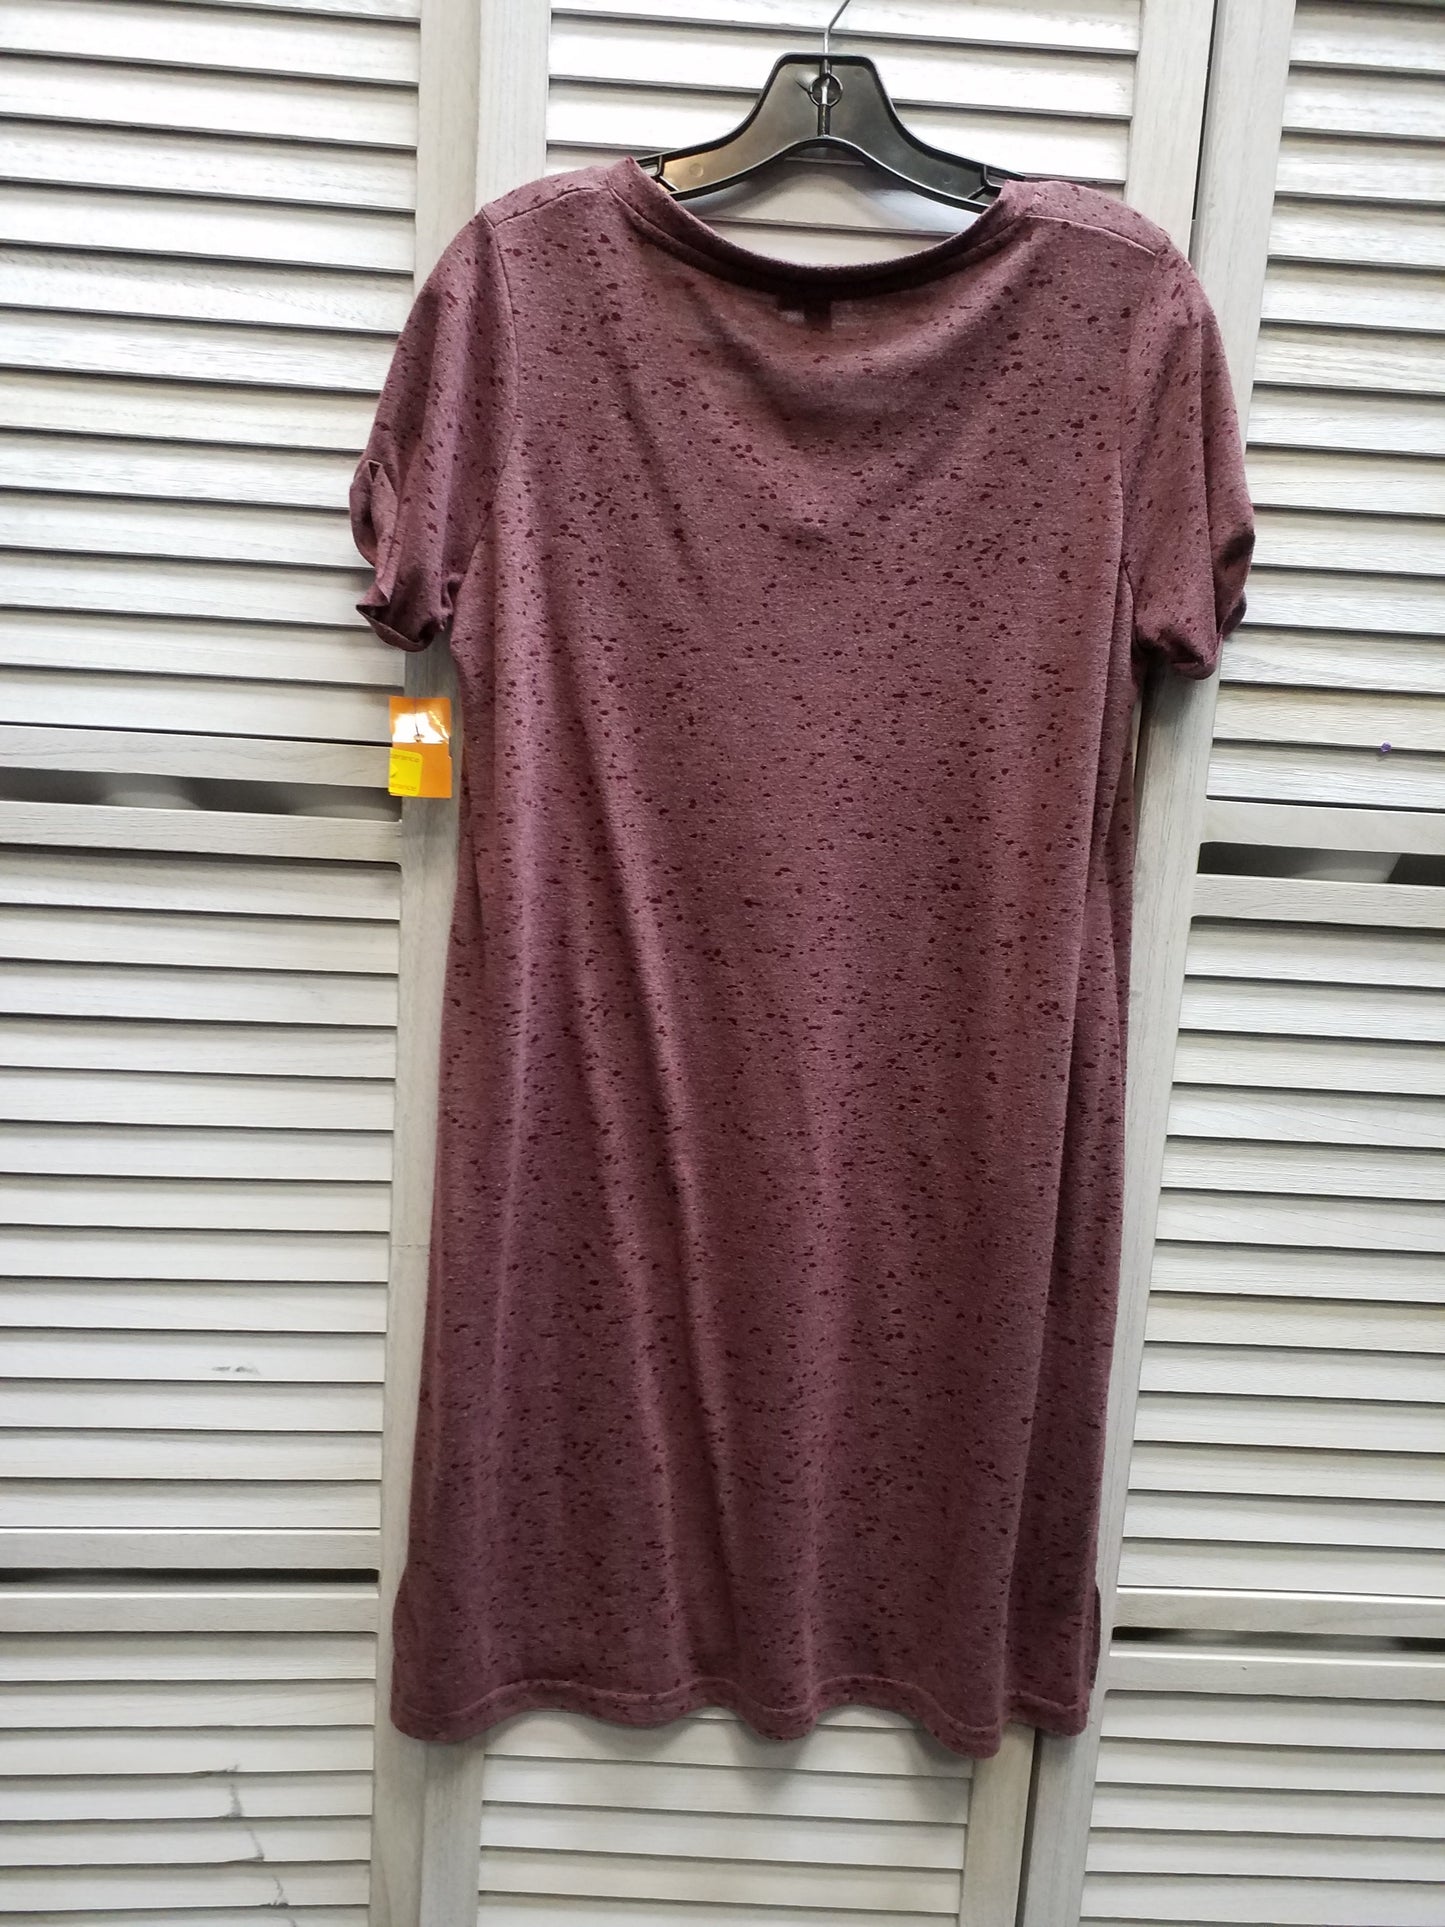 Burgundy Dress Casual Short Cotton On, Size S